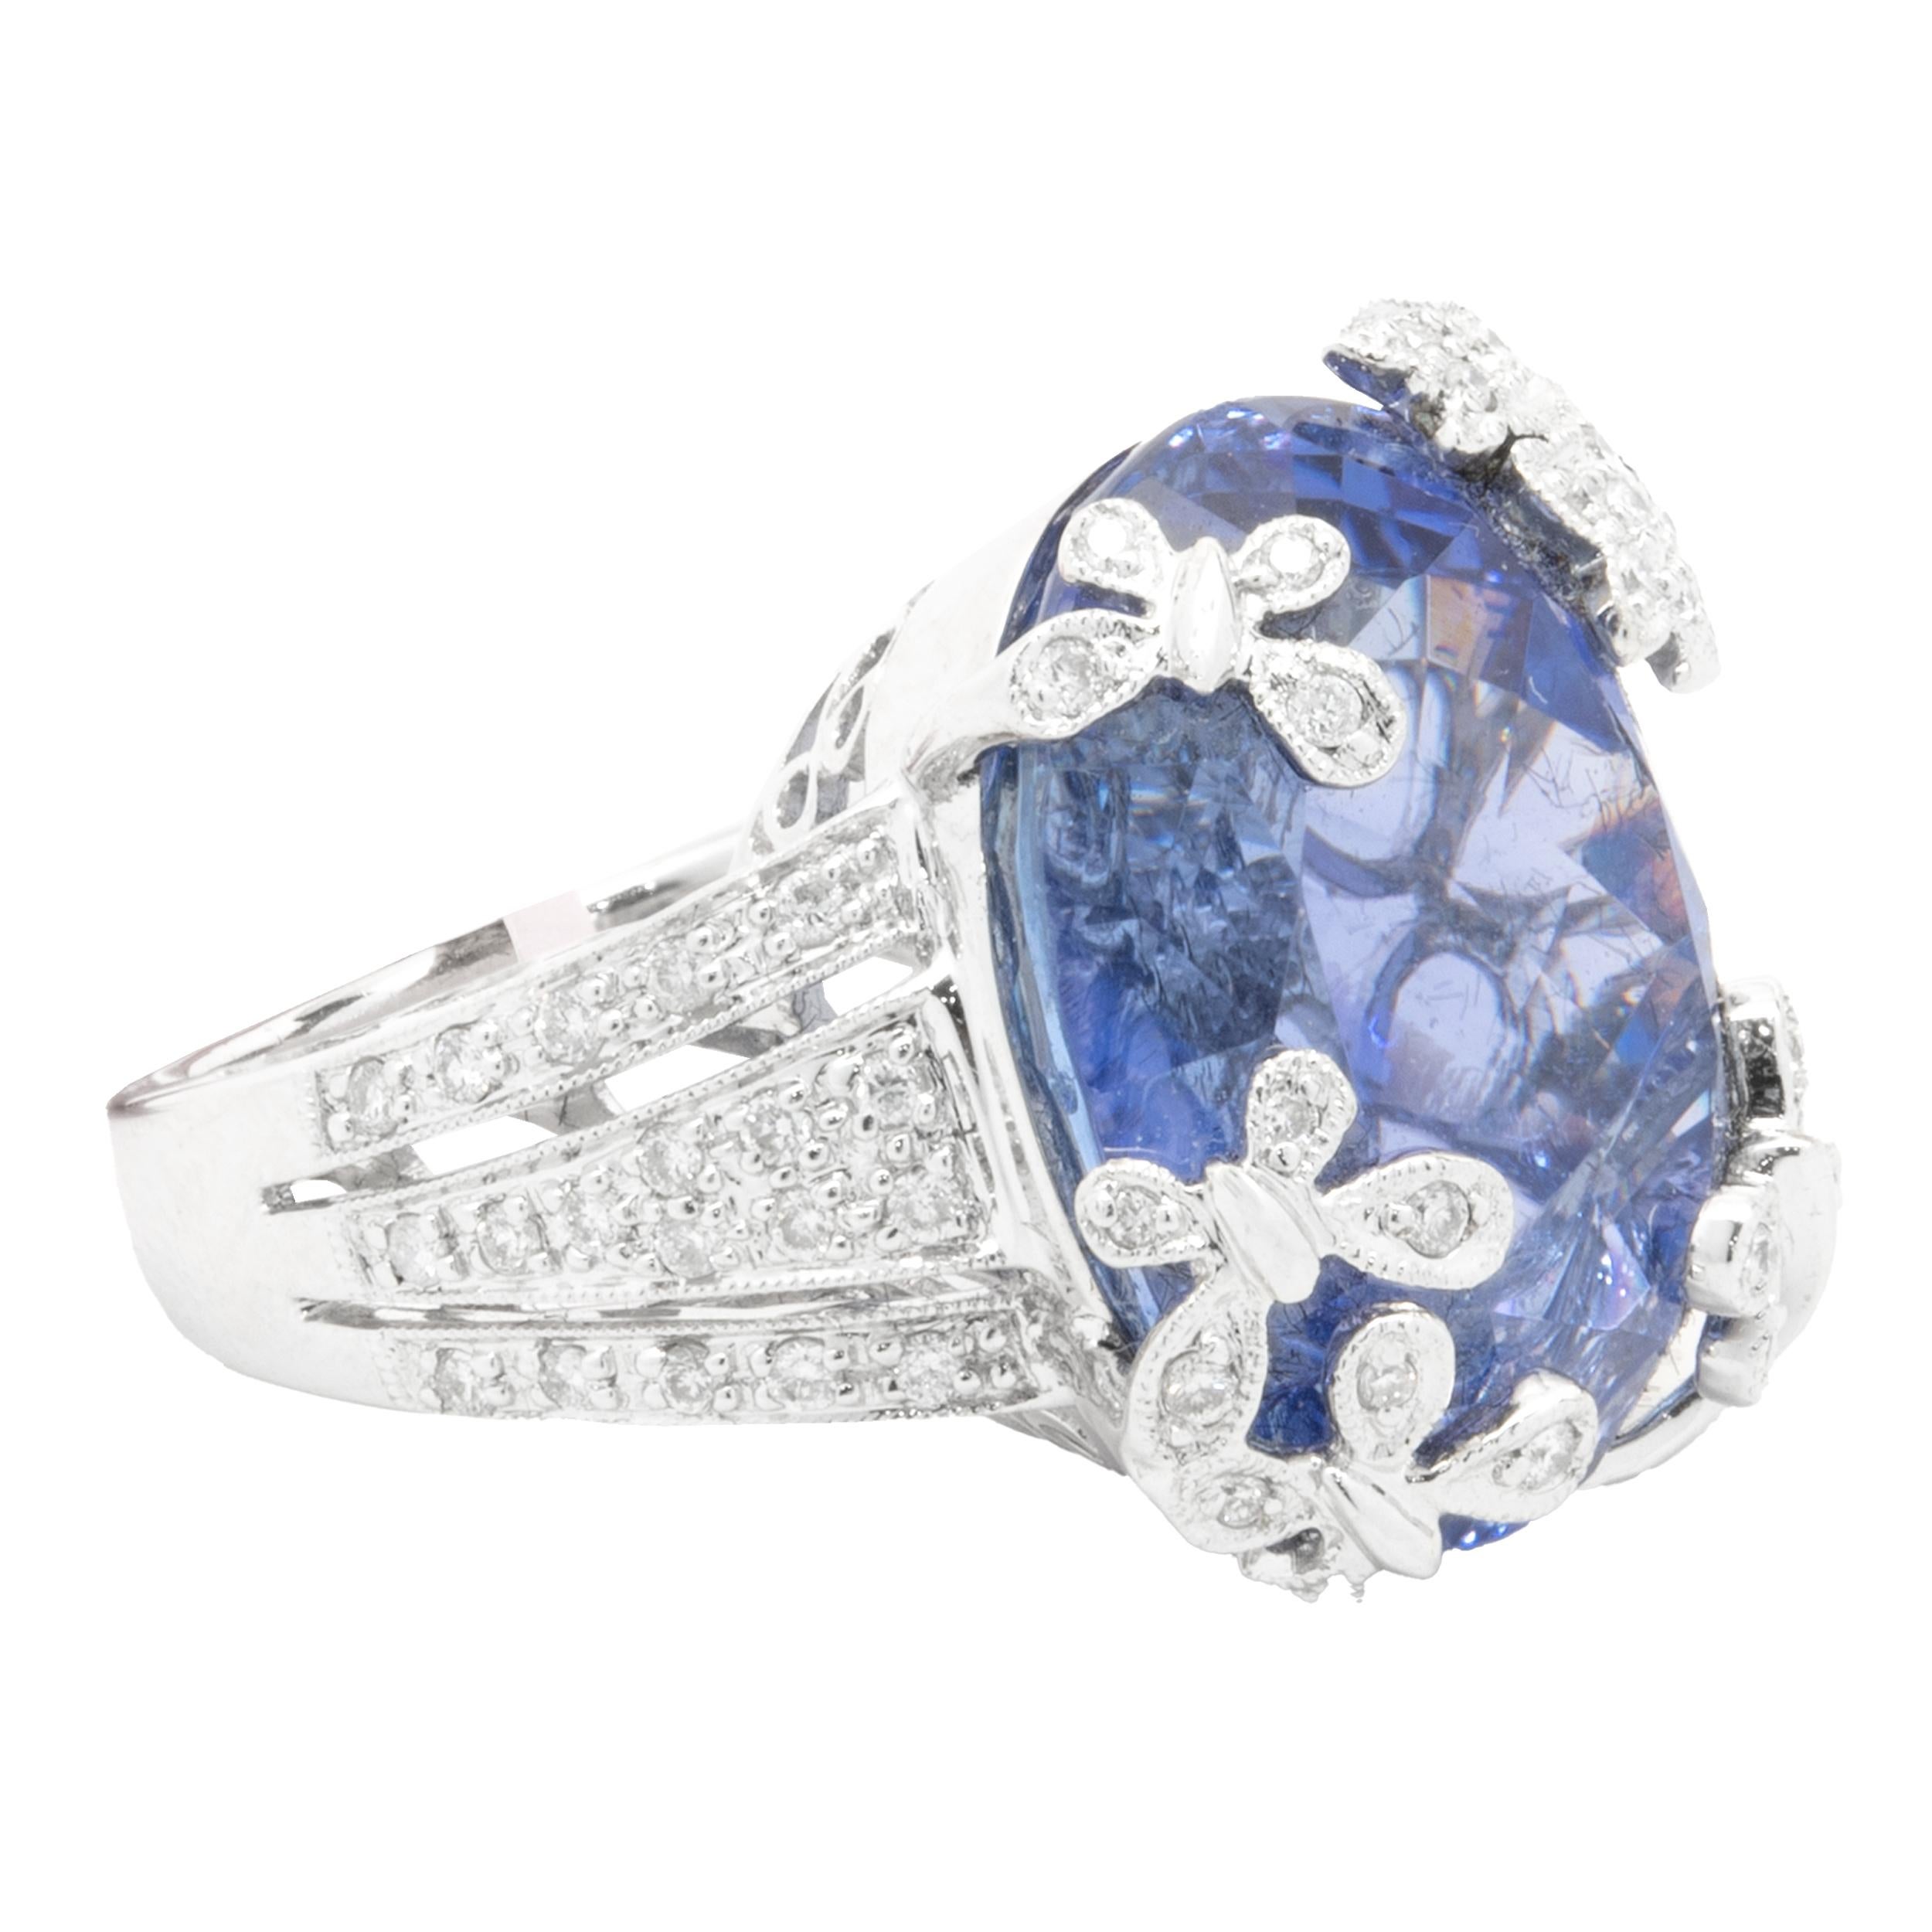 Designer: custom
Material: 18K white gold
Diamond: 60 round brilliant cut = 0.40cttw
Color: G
Clarity: VS1-2
Tanzanite: 1 oval cut = 22.46ct
Ring Size: 6 (complimentary sizing available)
Weight: 13.20 grams